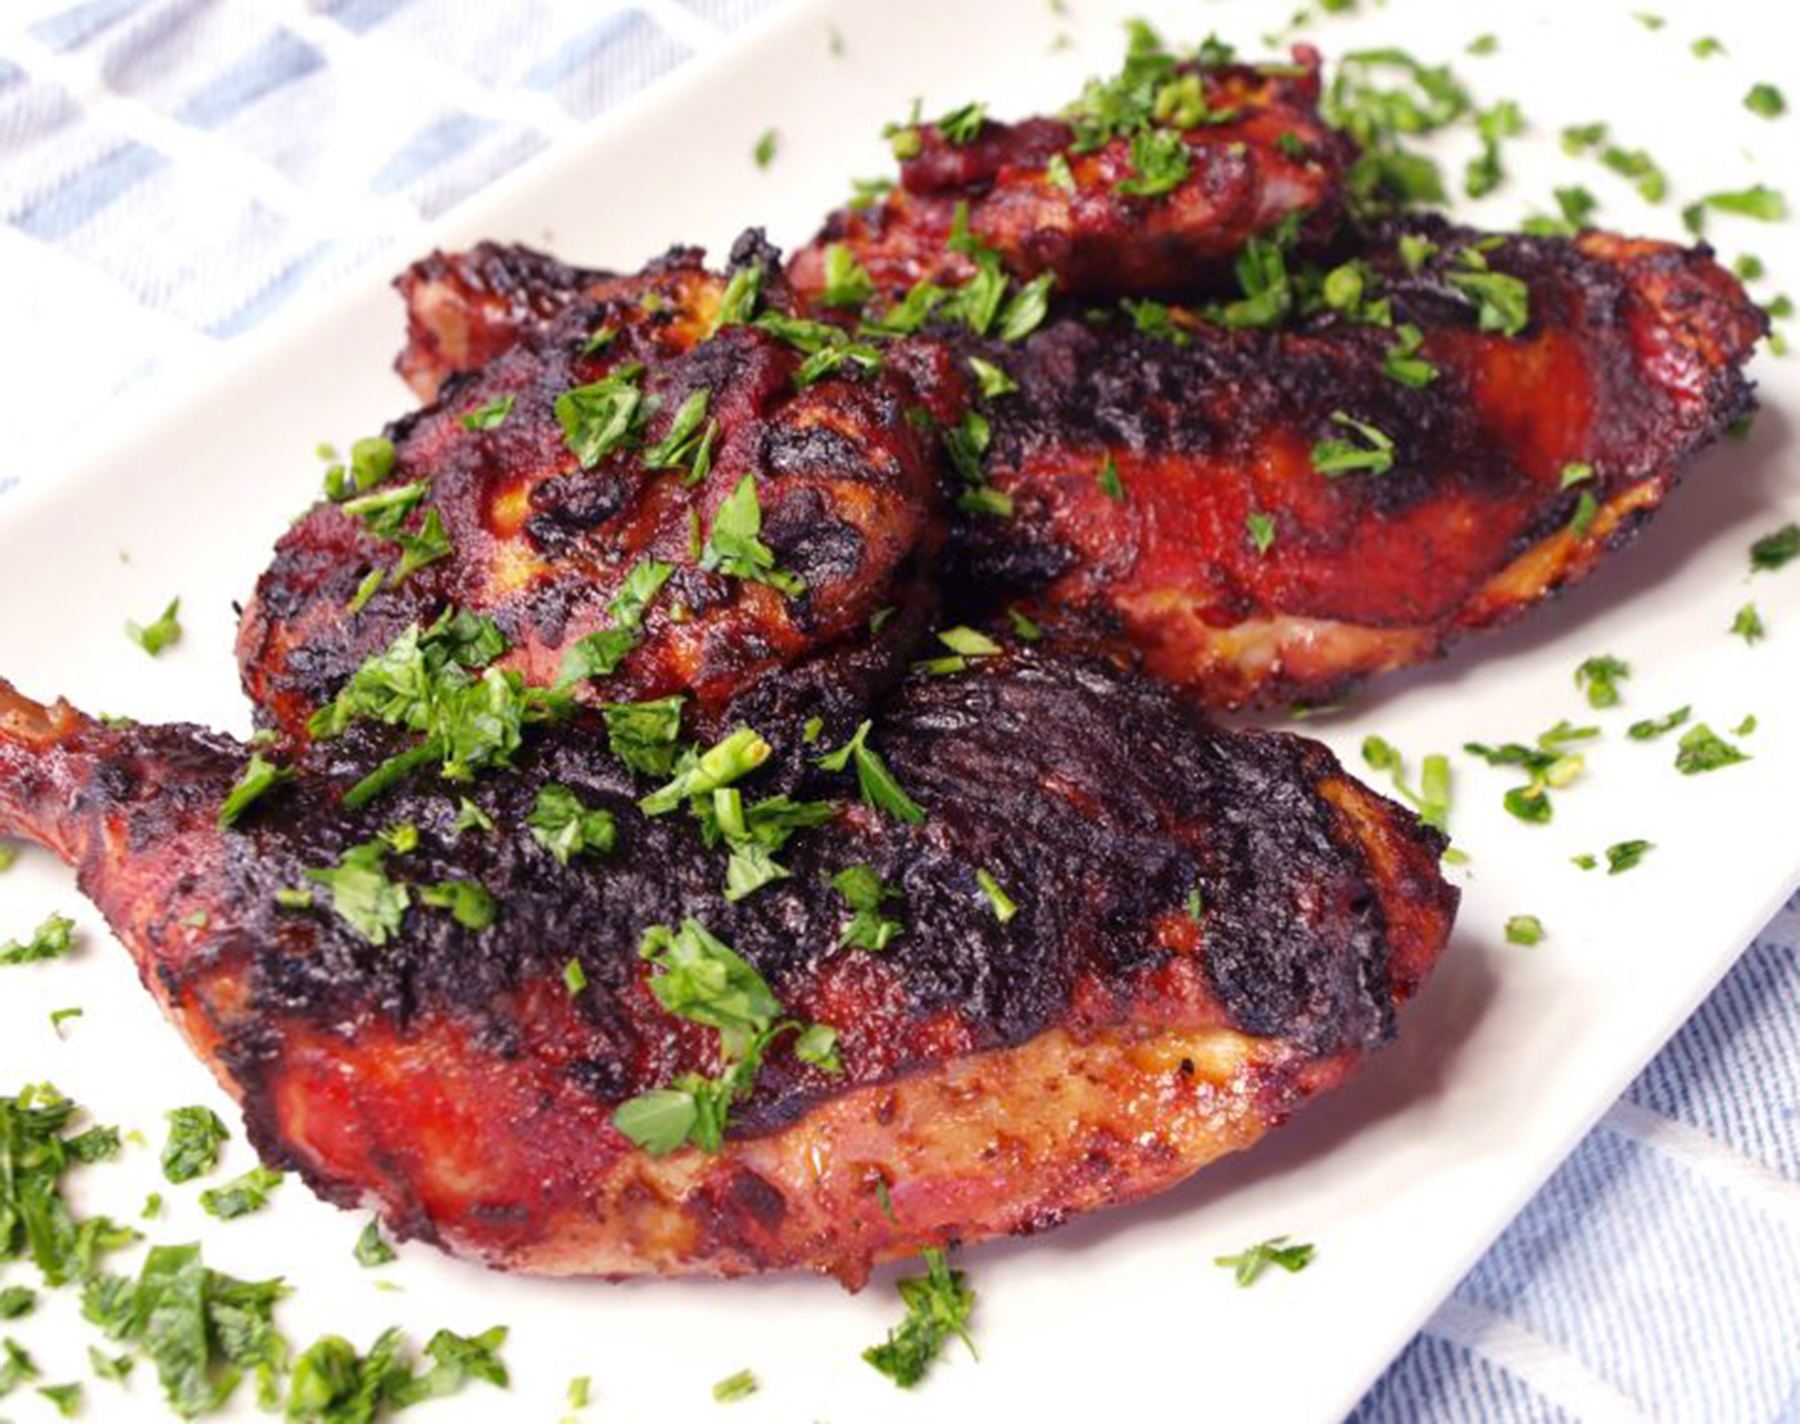 Grilled Chicken with Tomato Free BBQ Sauce